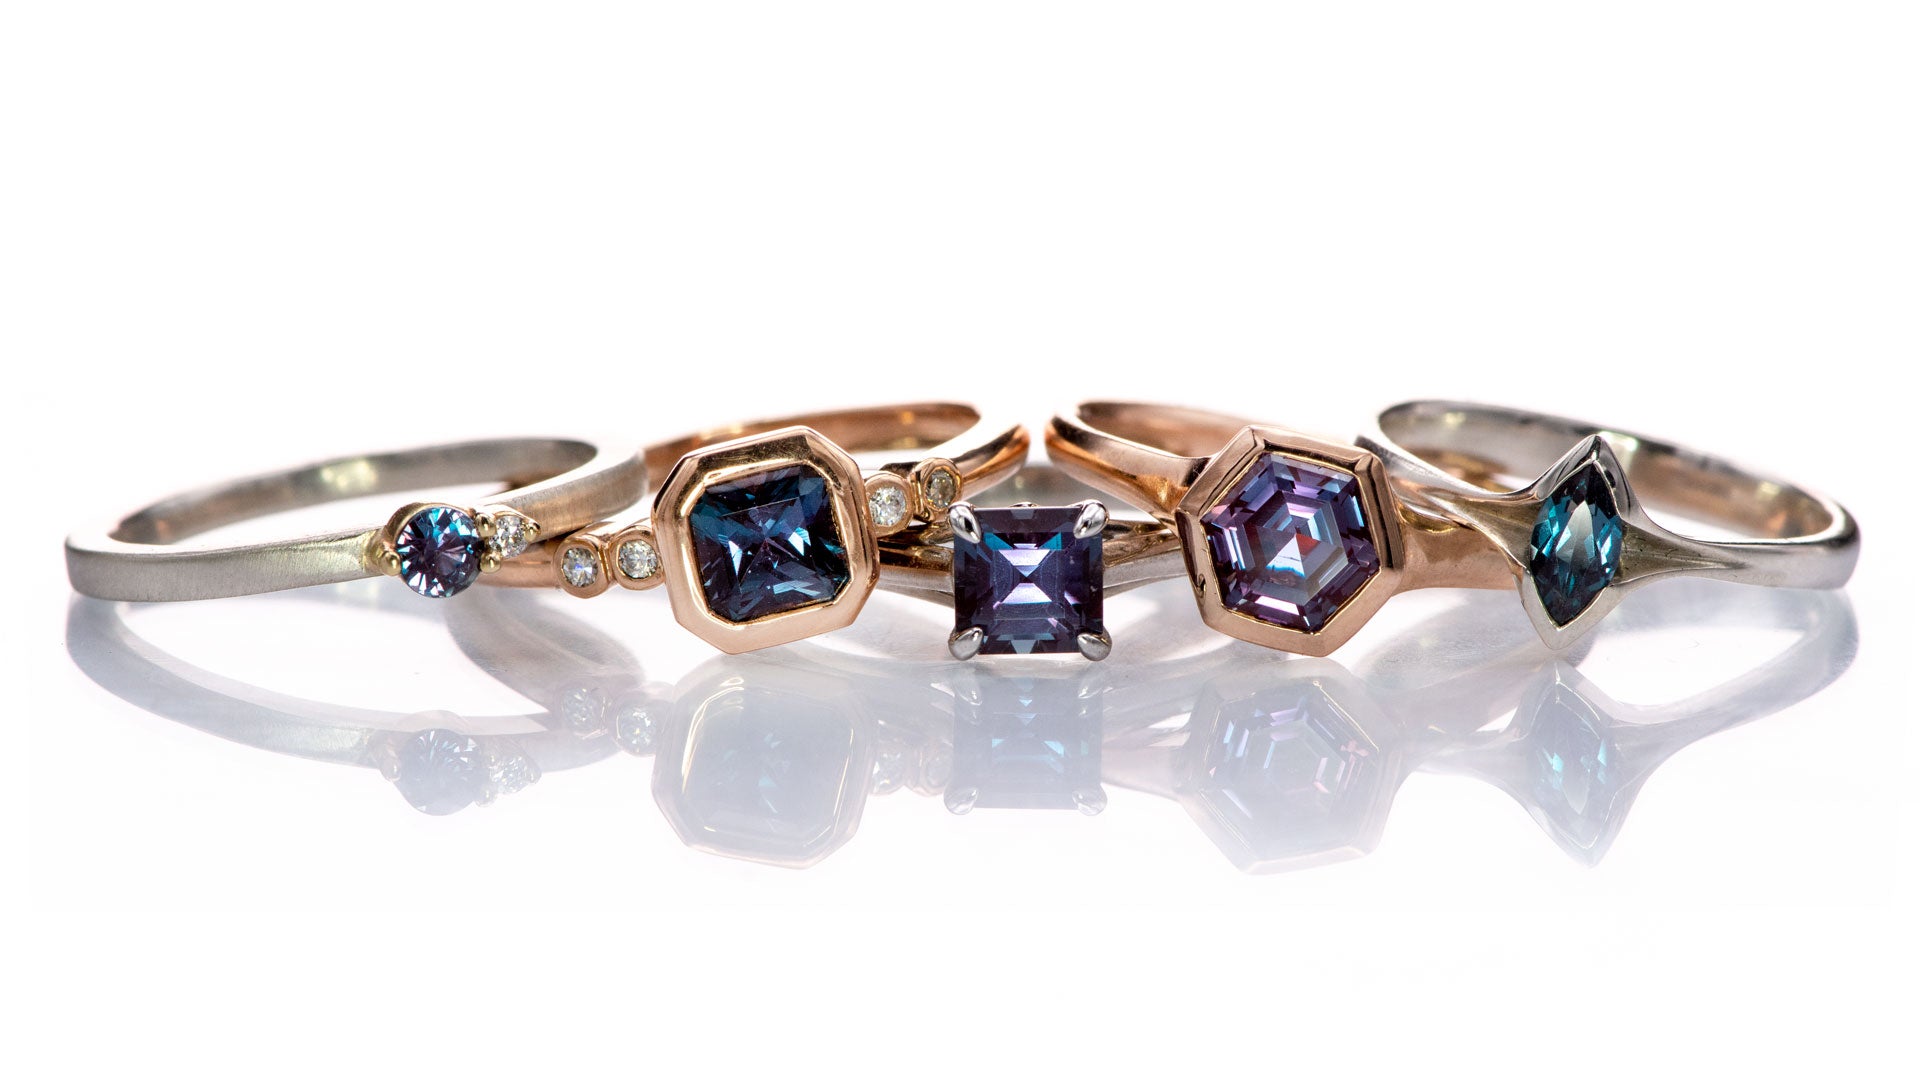 stunning ethical alexandrite engagement rings by Nodeform